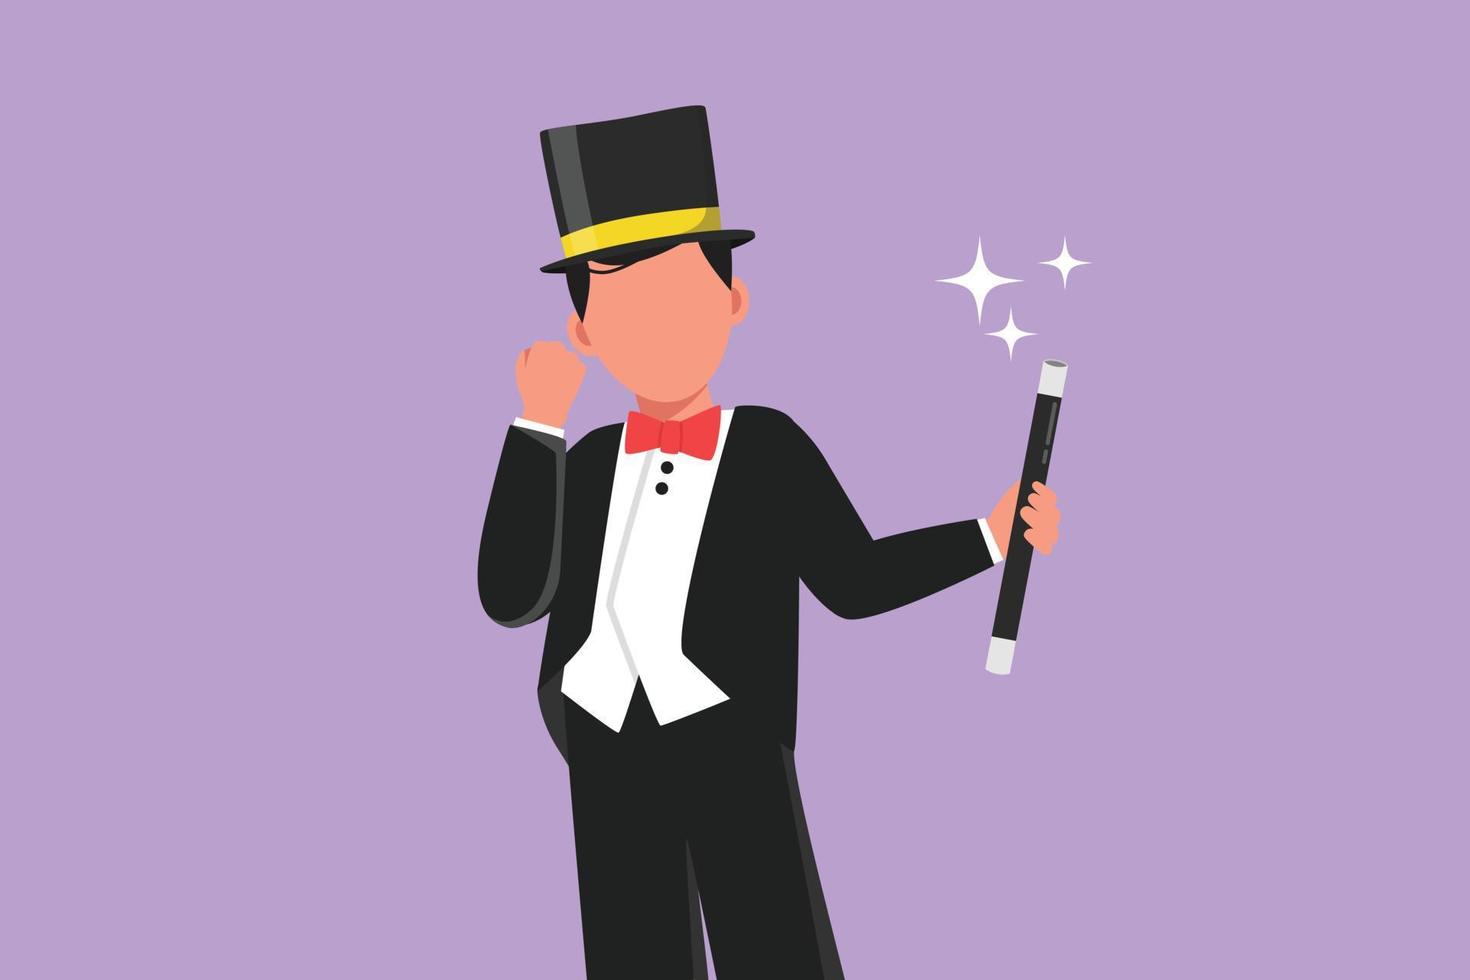 Graphic flat design drawing magician in tuxedo with celebrate gesture wear hat and holds magic stick ready to entertain audience in circus show. Magical performance. Cartoon style vector illustration